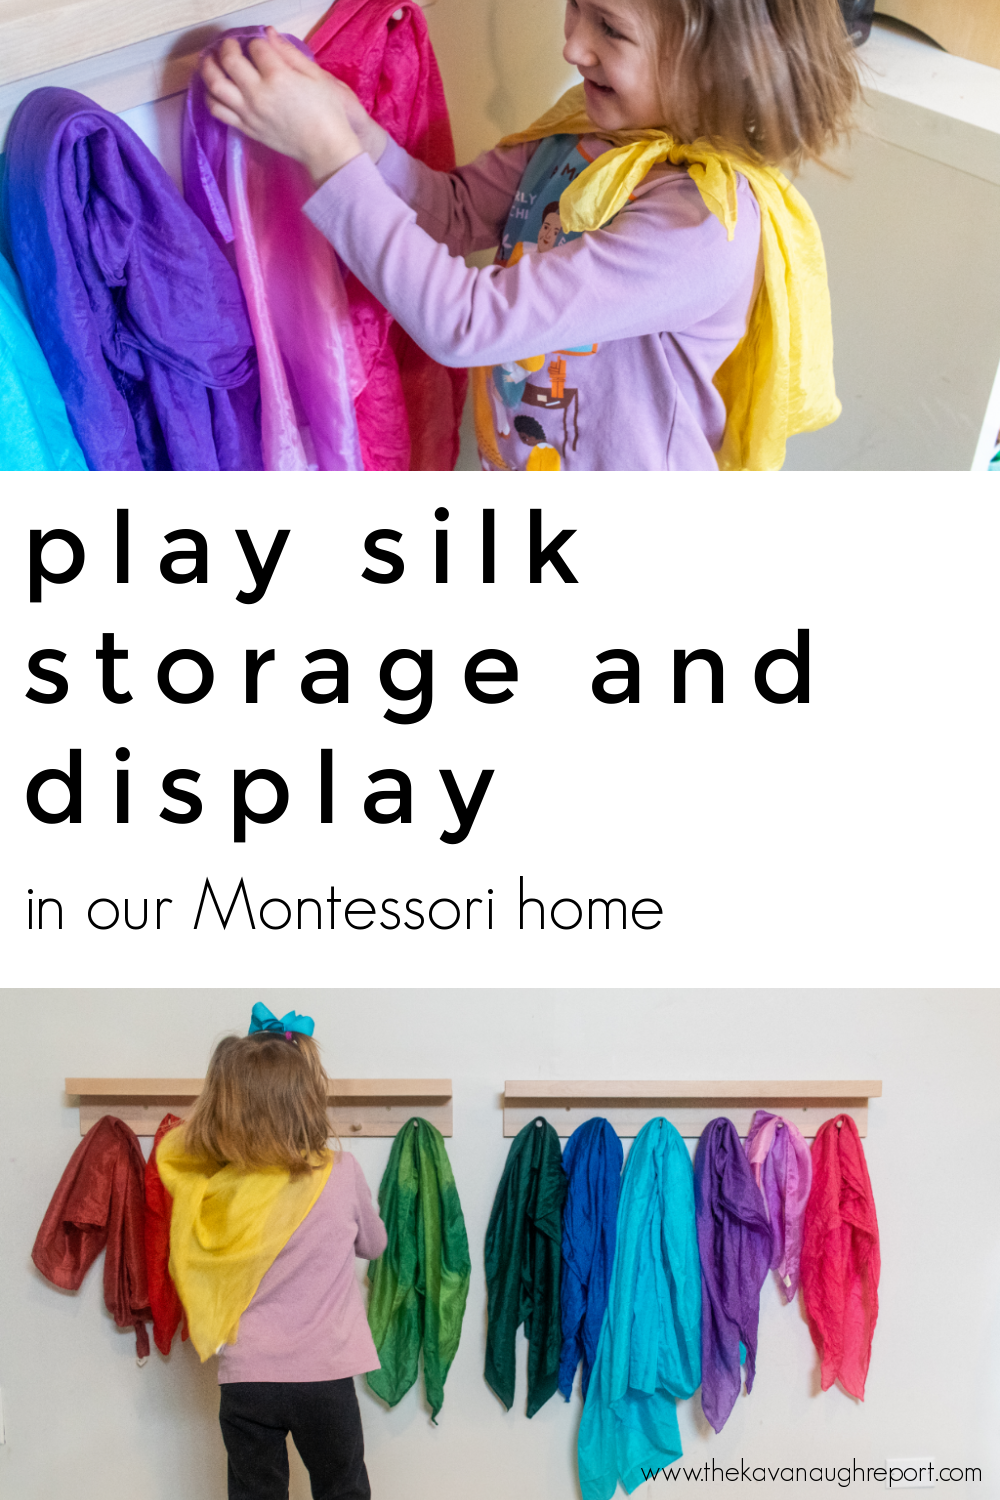 Storage and display solutions for play silks in a Montessori home. Easy to use ideas to help make this popular toy accessible and organized.